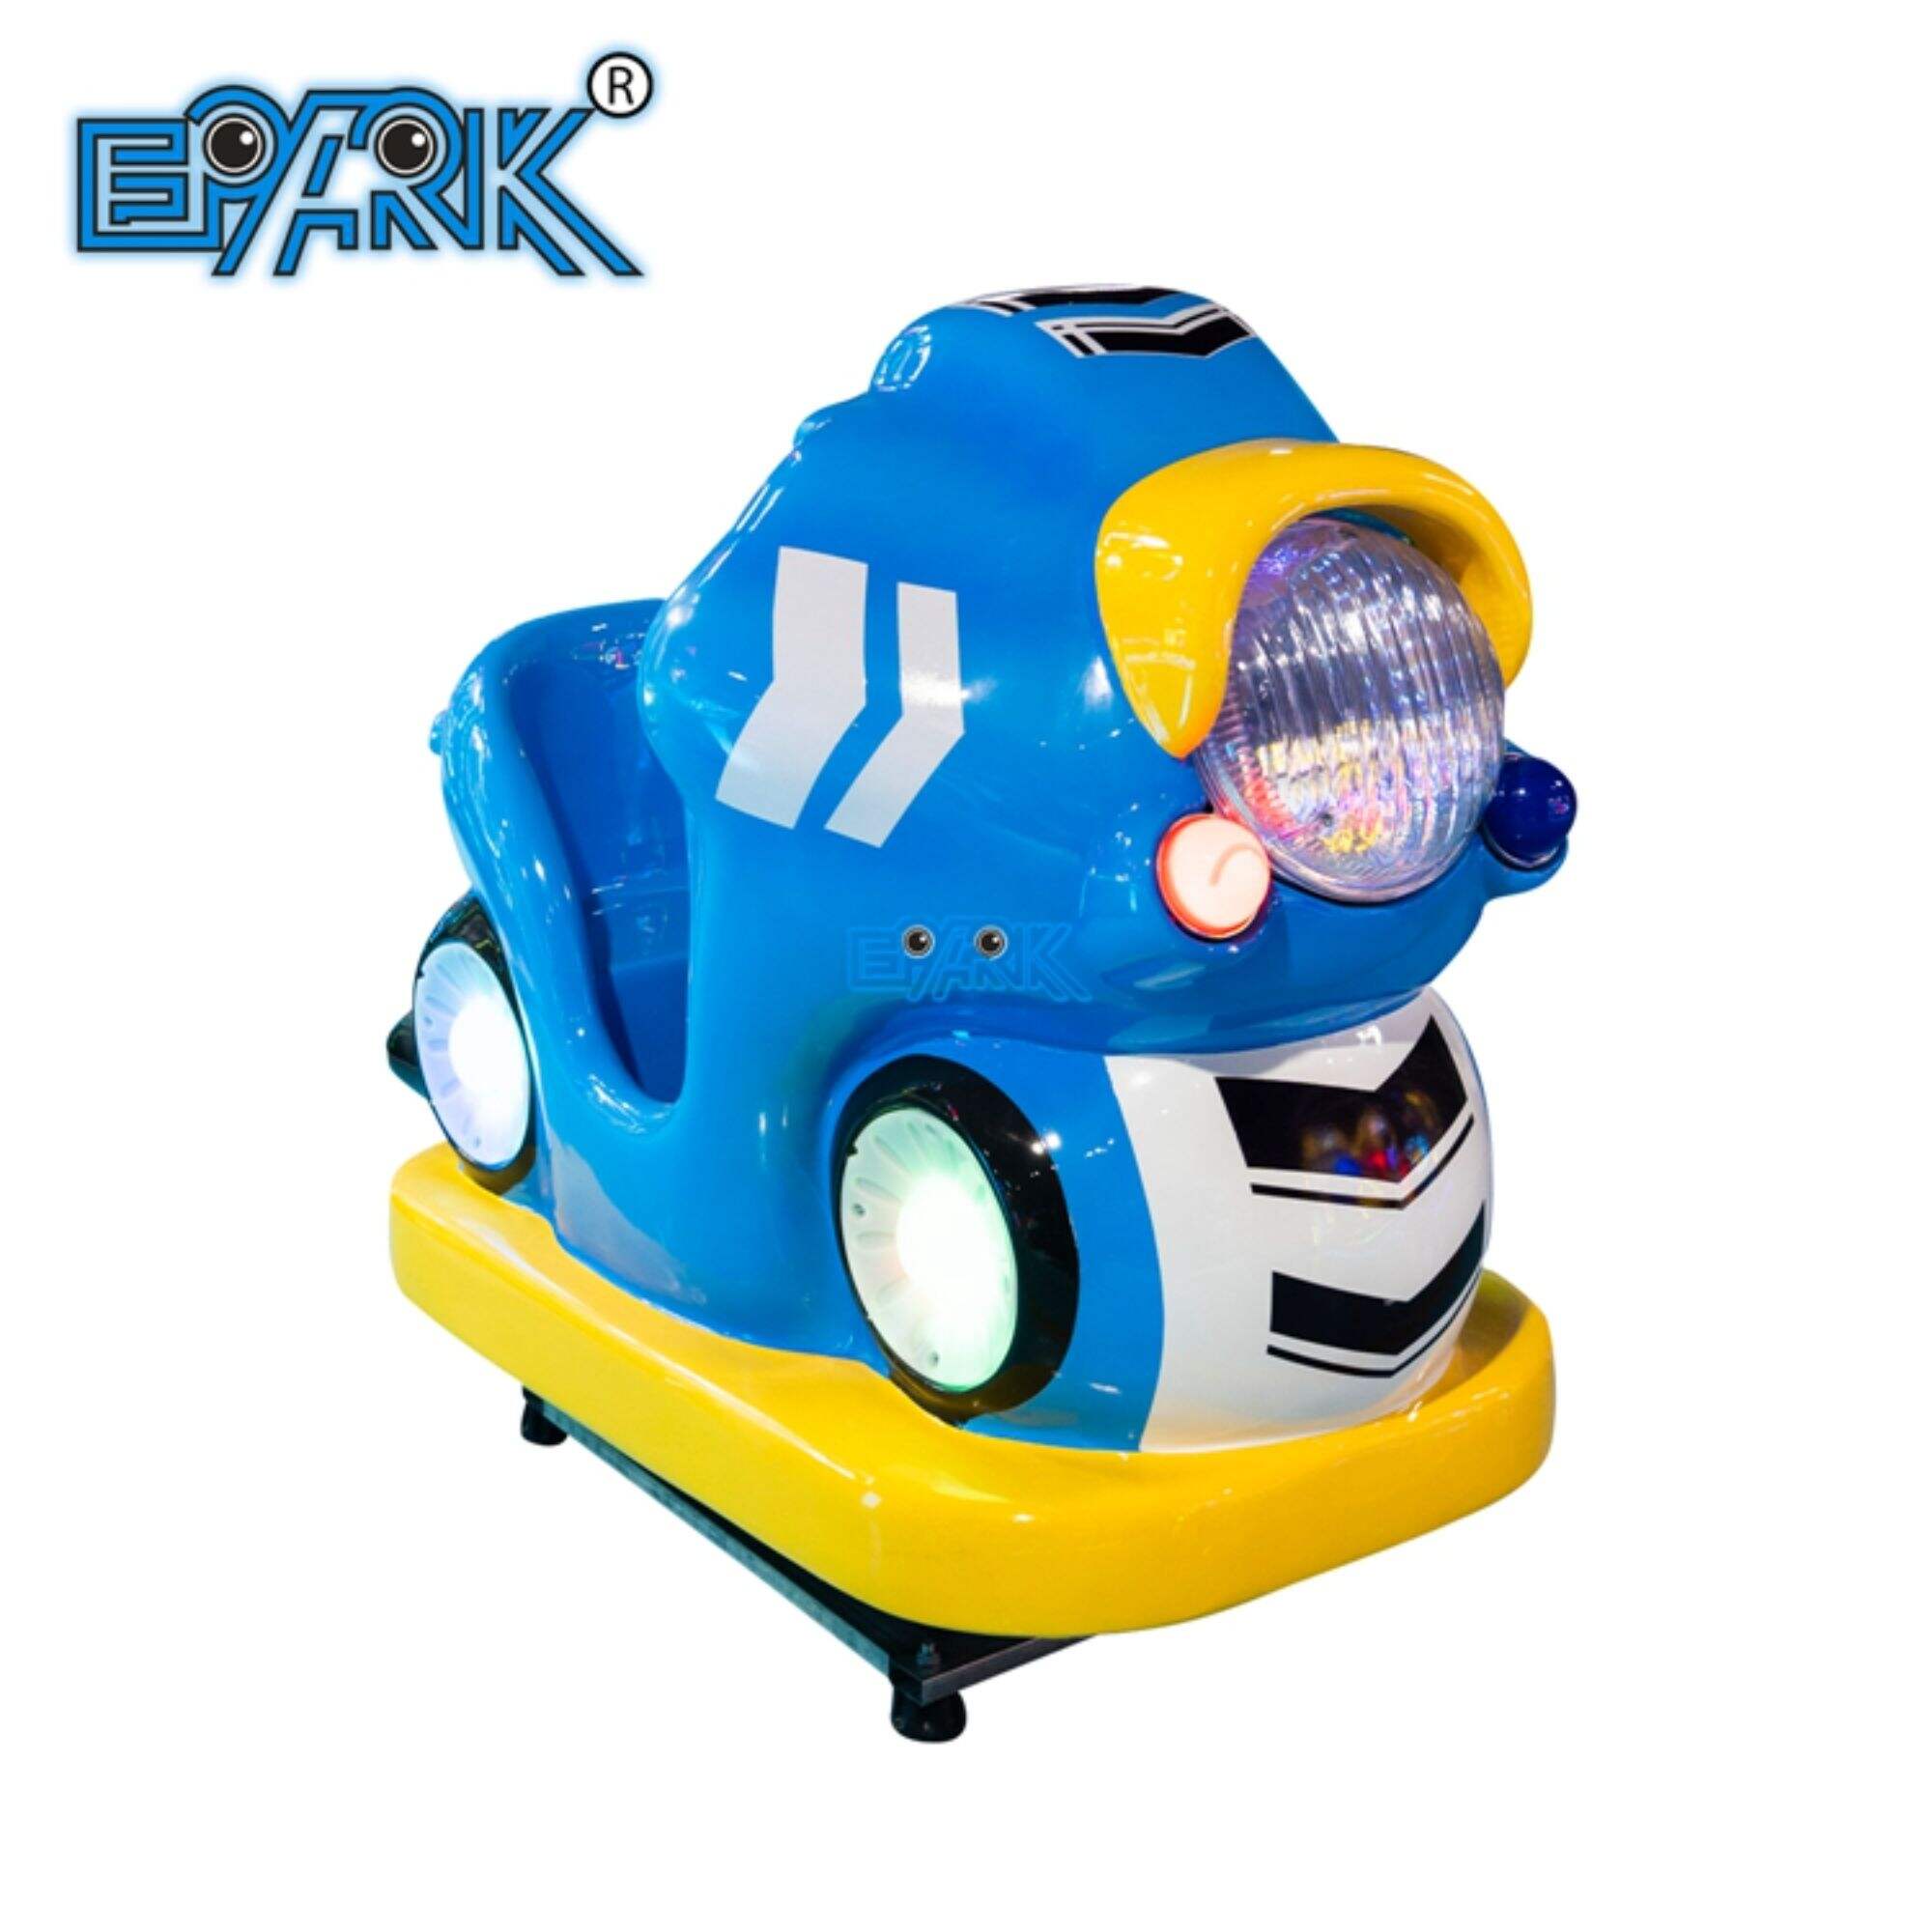 Wholesale Amusement Park Kiddie Rides Mall Newest Kids Cars Electric Ride with Screen